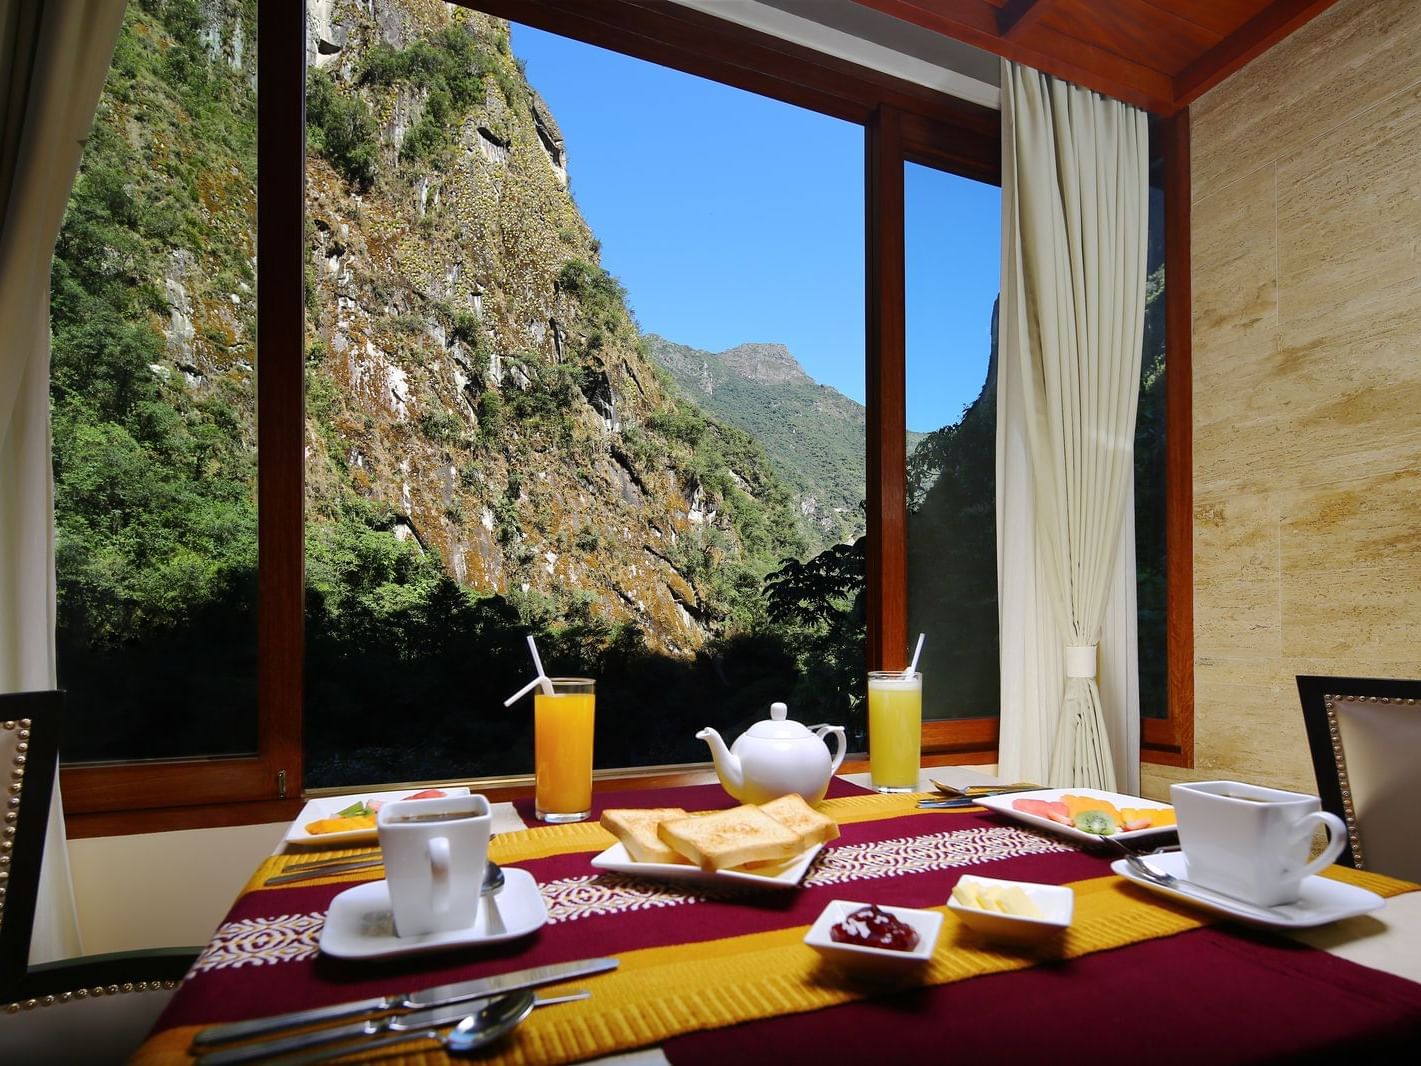 Breakfast table arranged with the mountain view at Hotel Sumaq